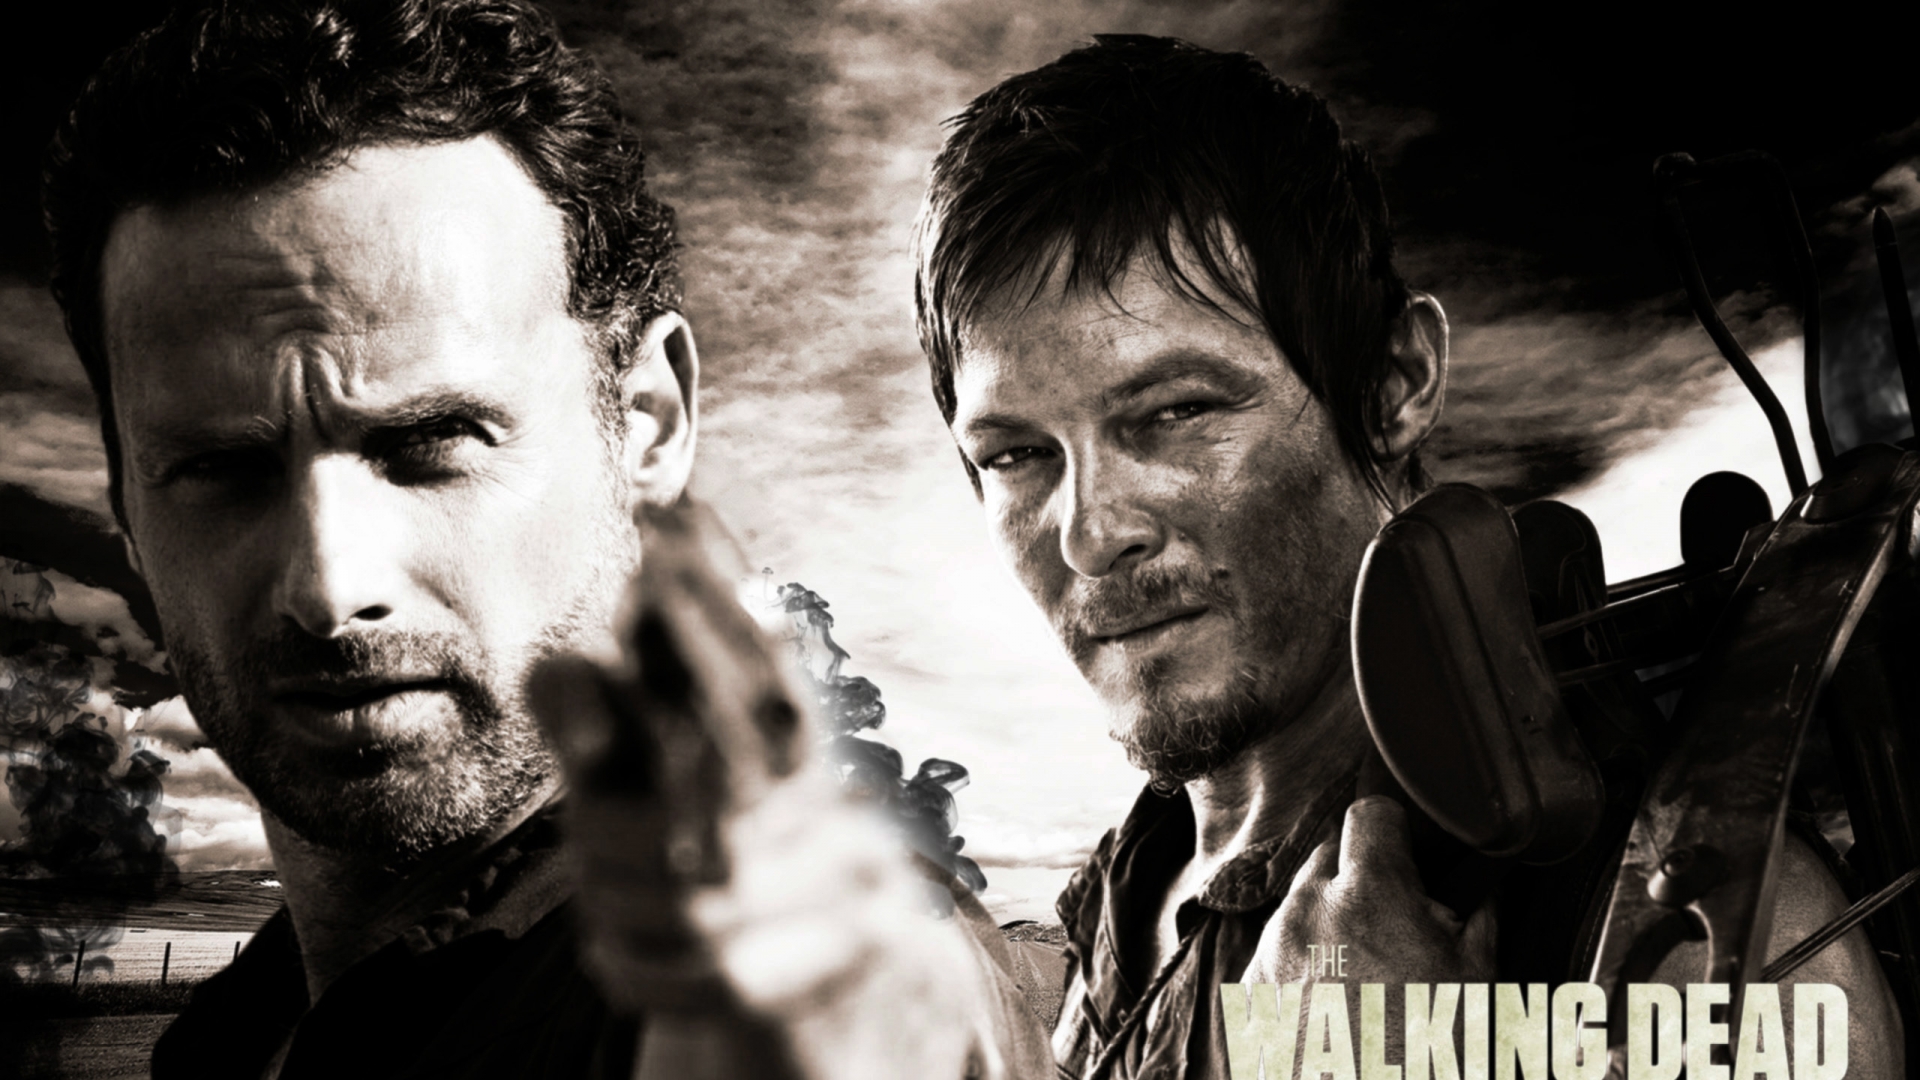 Rick and Daryl The Walking Dead for 1920 x 1080 HDTV 1080p resolution